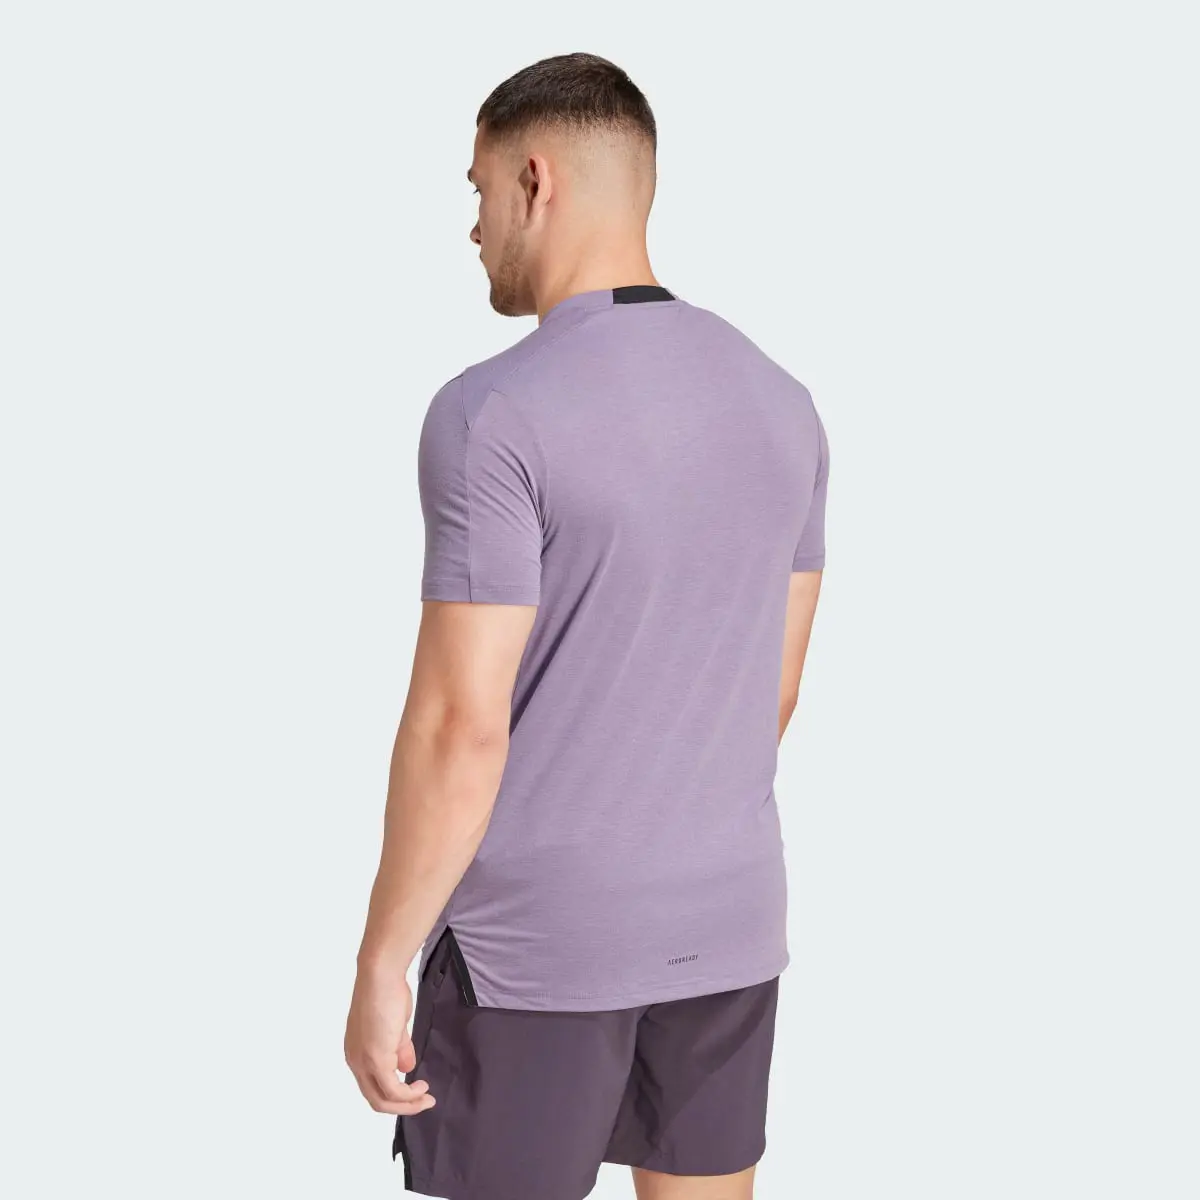 Adidas Designed for Training Workout Tee. 3